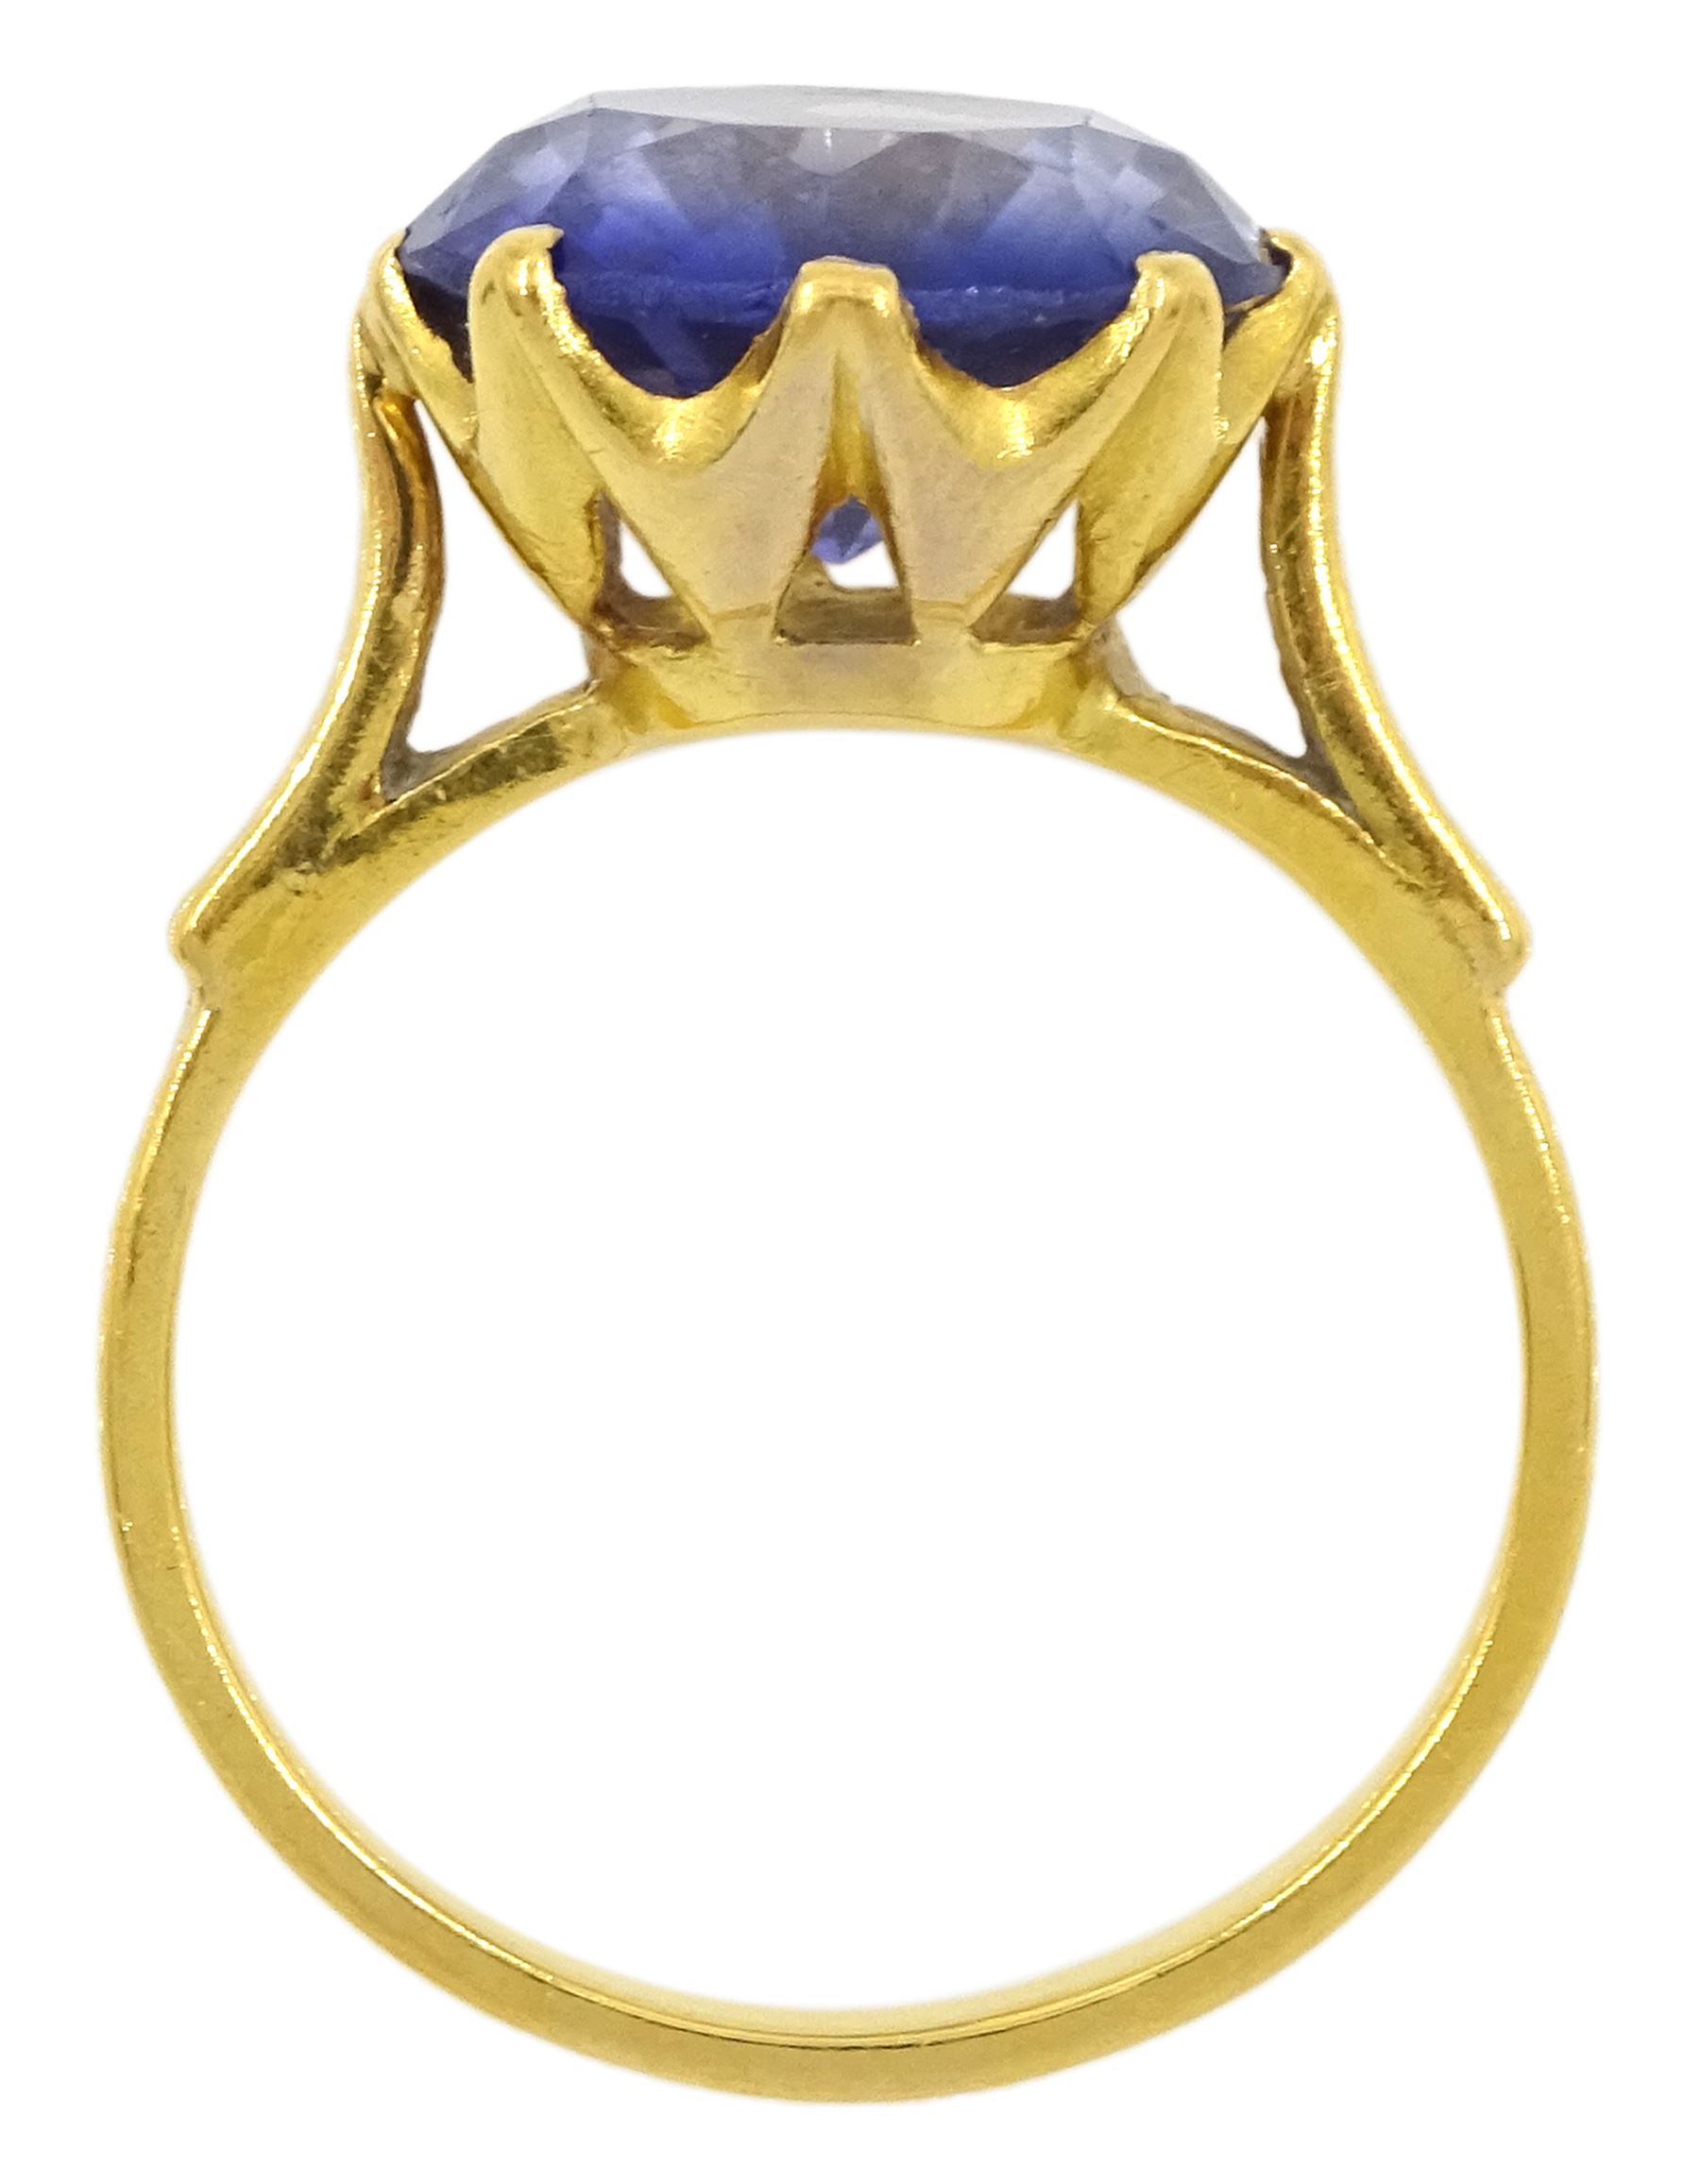 22ct gold single stone synthetic sapphire ring - Image 4 of 4